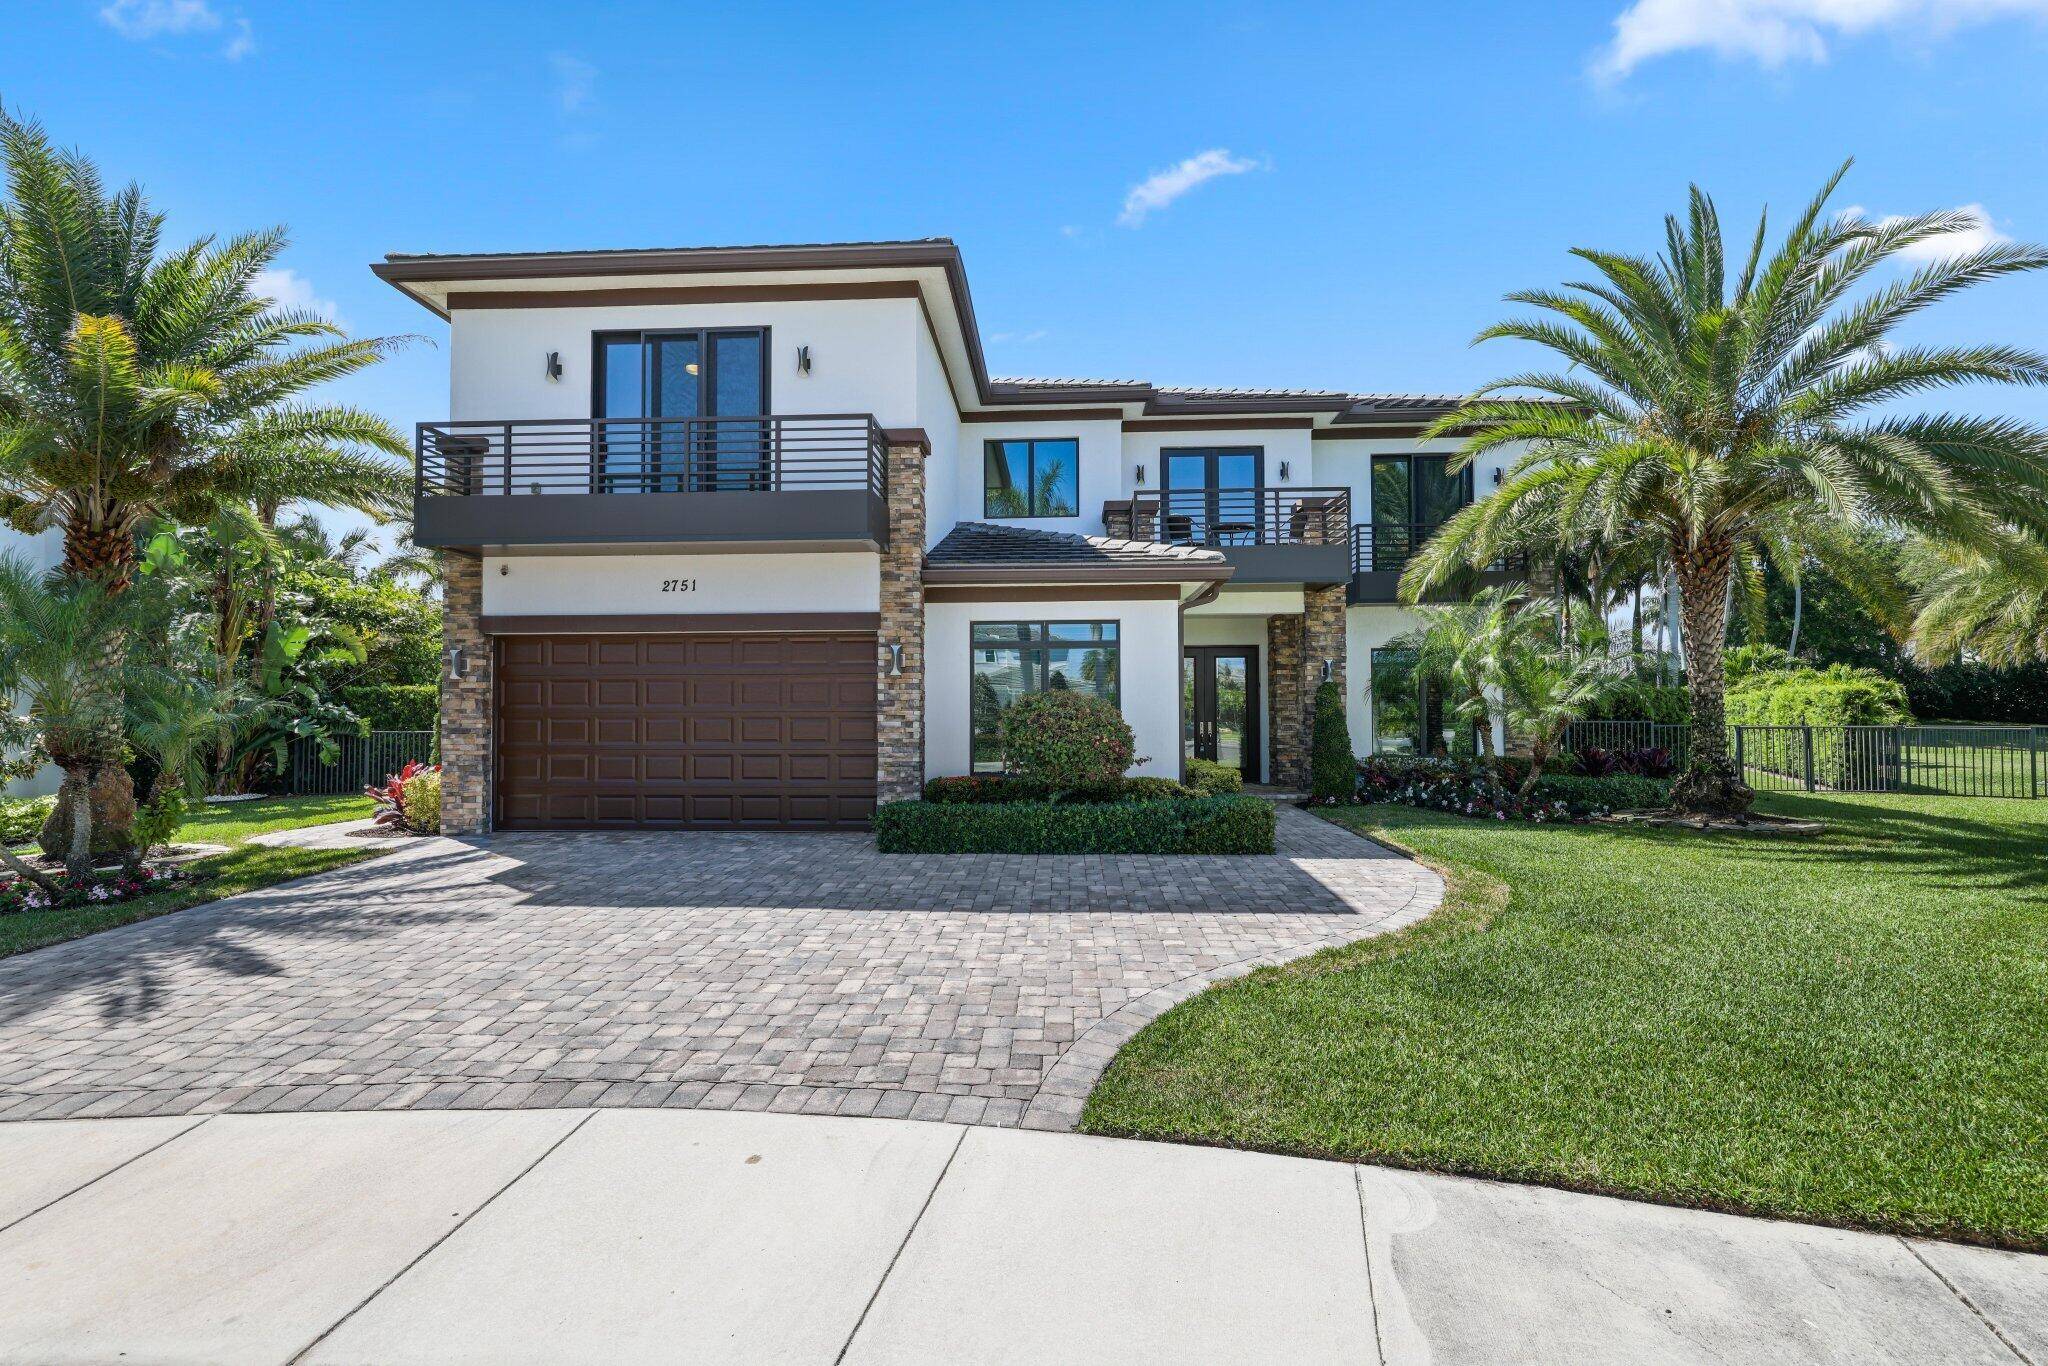 Introducing the Callahan model, a luxurious 6 bedroom home with an office loft, located in the highly sought after gated community of Royal Palm Polo.